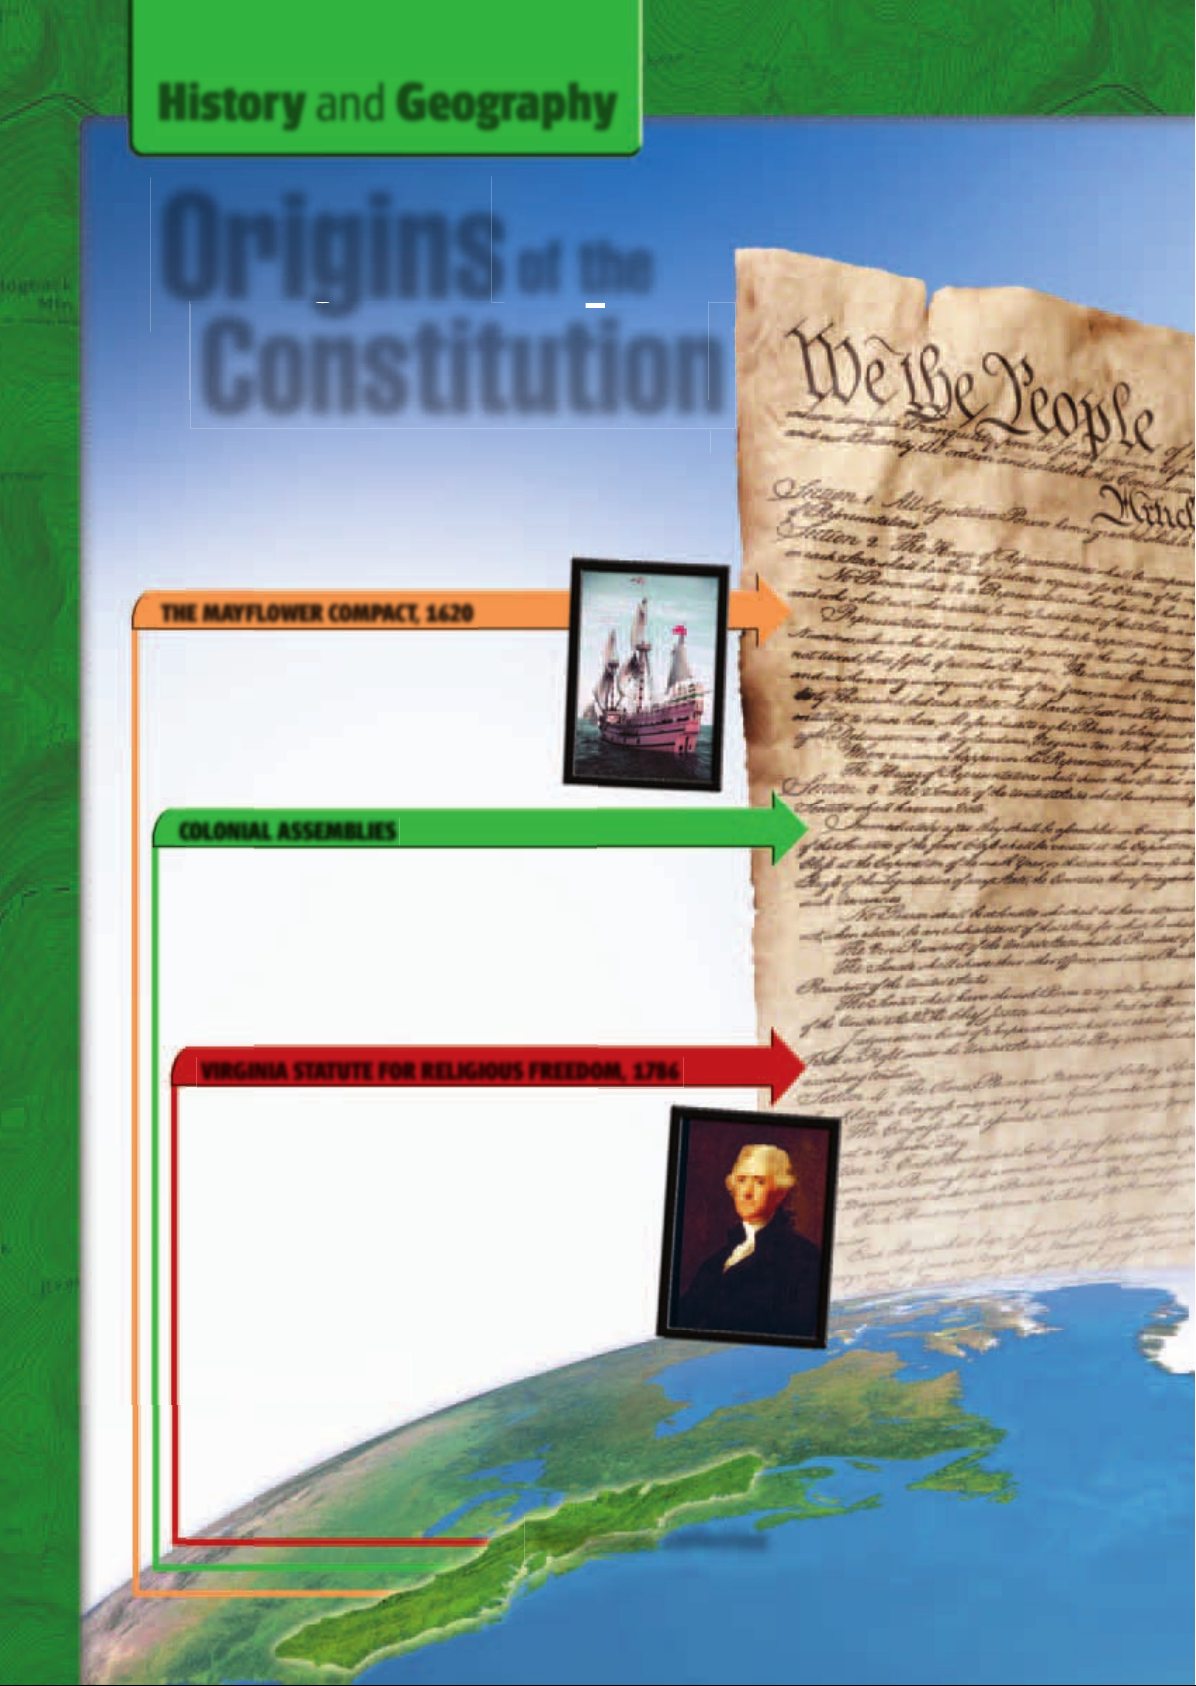 US_History_Textbook_8th_Grade_Chapter_4_Forming_a_Government Image-6